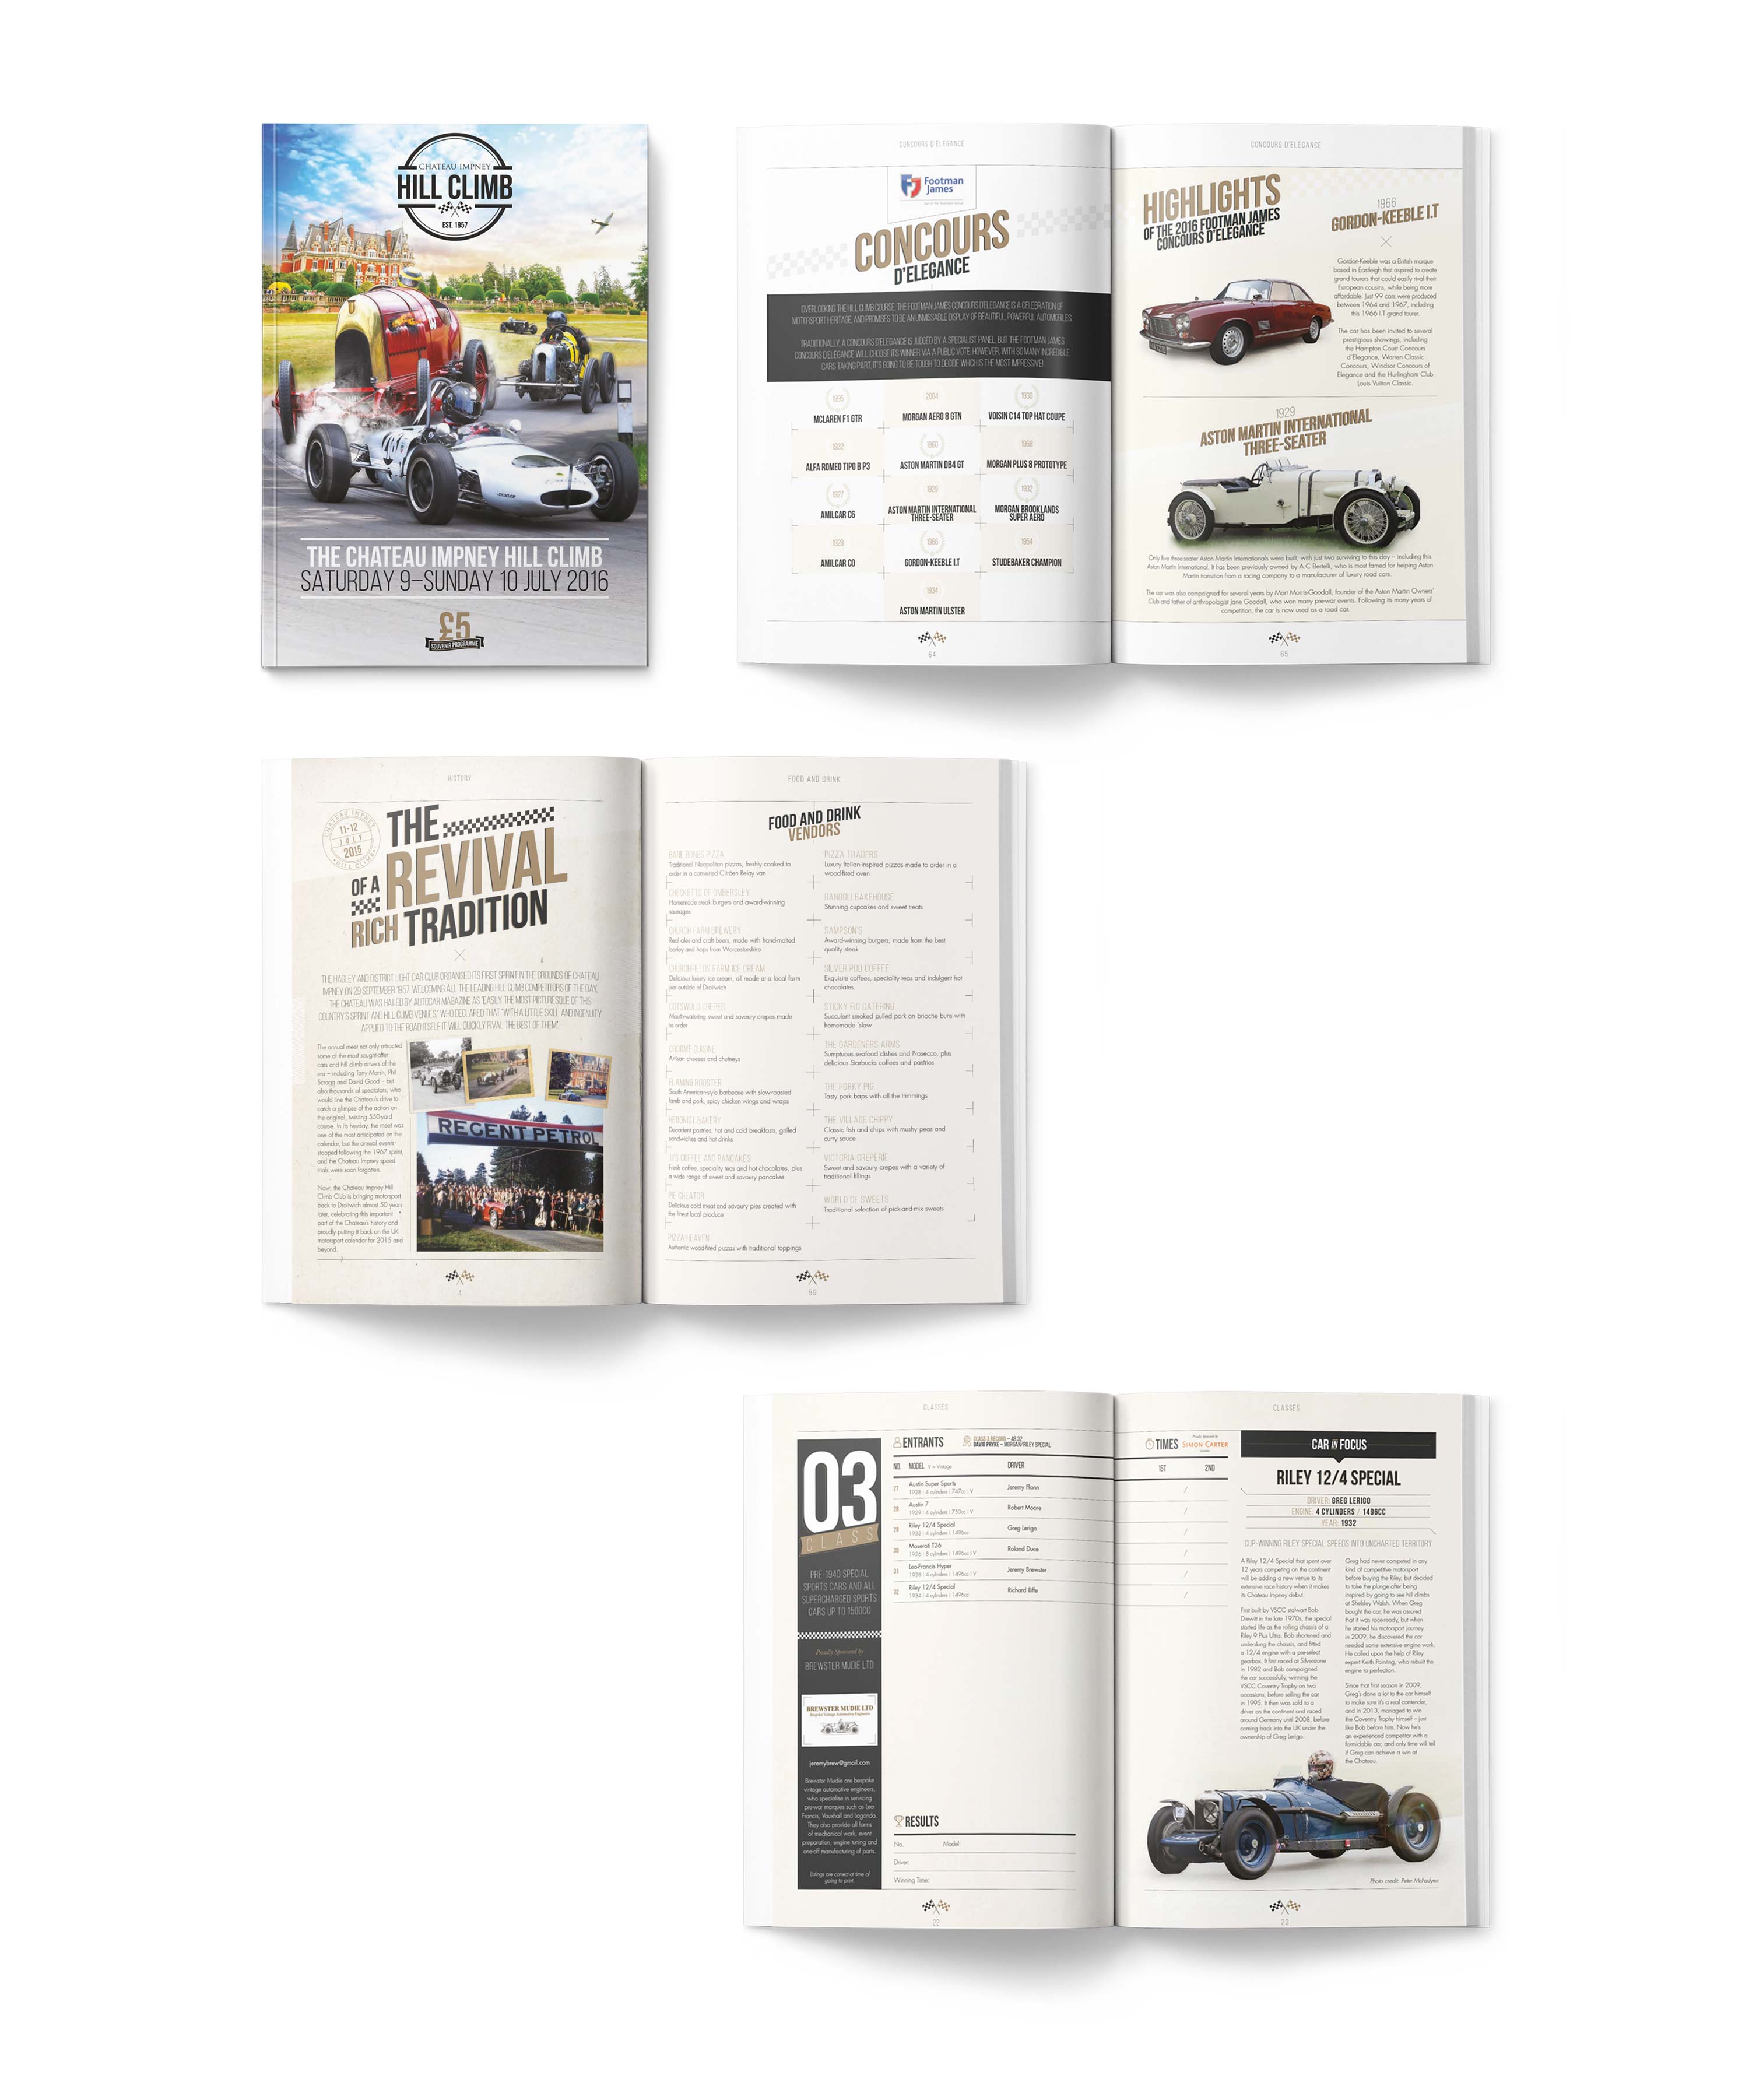 Event programme design and print for Chateau Impney Hill Climb by Mighty, marketing agency Worcester